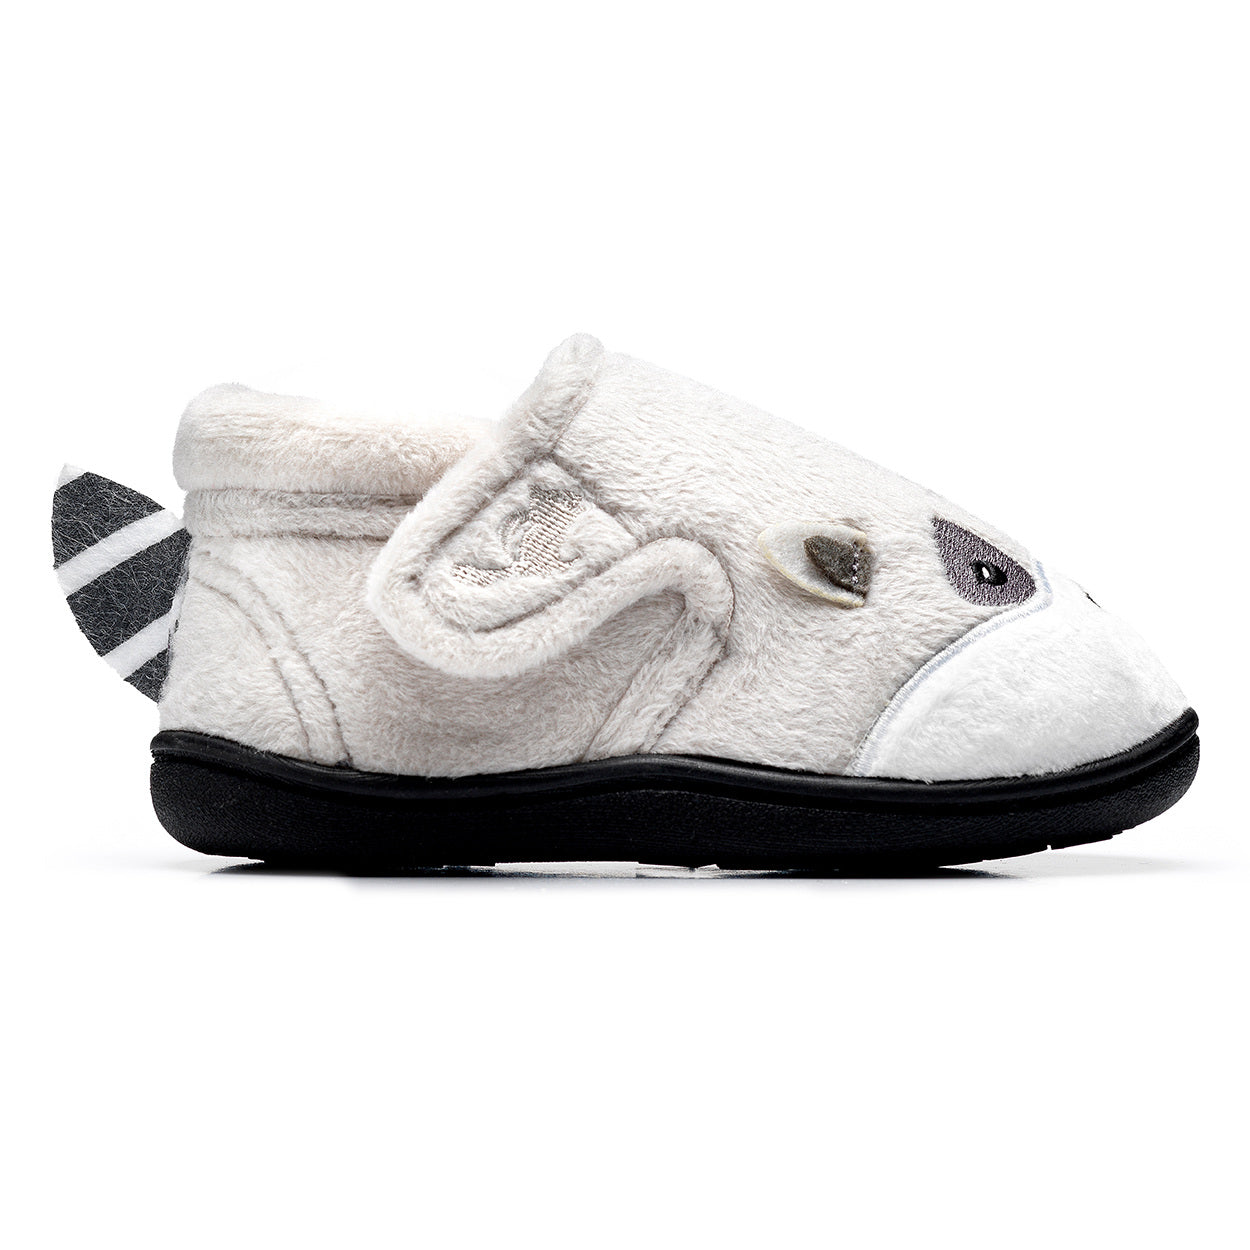 A unisex slipper by Chipmunks, style Rocco Racoon, in grey racoon design with velcro fastening. Right side view.